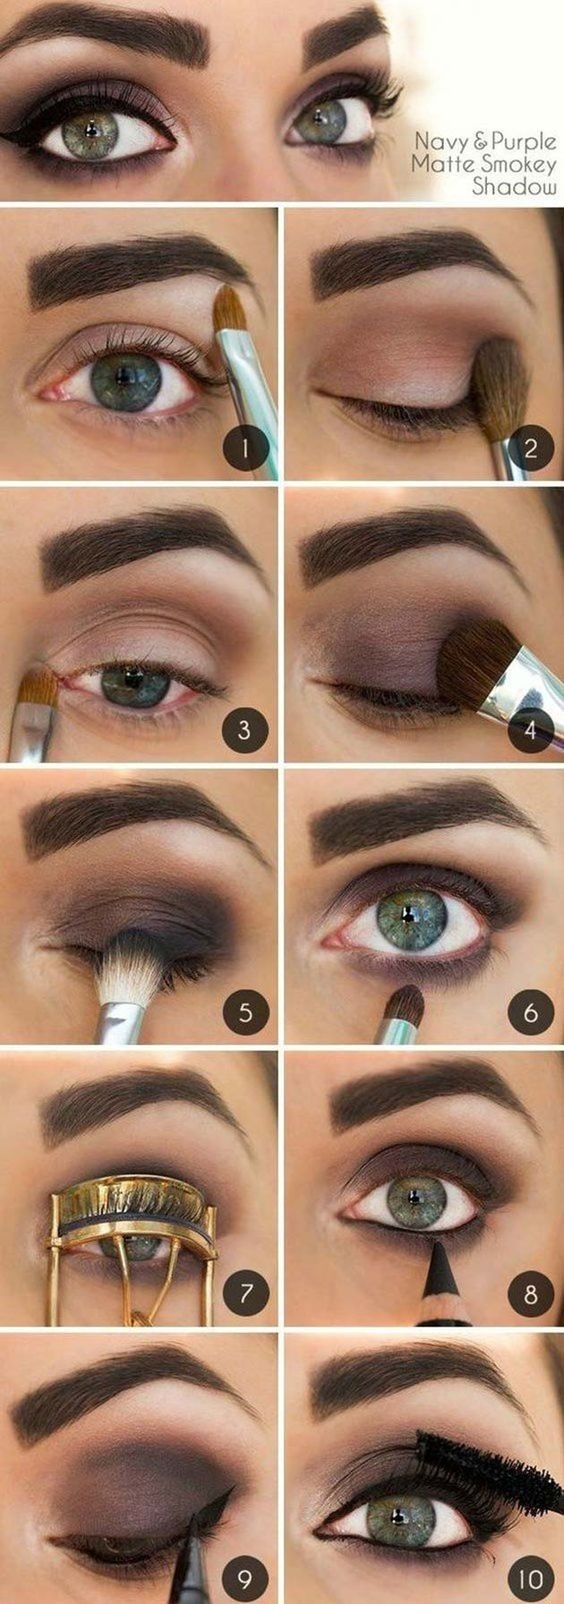 10 Step By Step Makeup Tutorials For Green Eyes - Her Style Code inside Makeup Tutorials For Dark Green Eyes